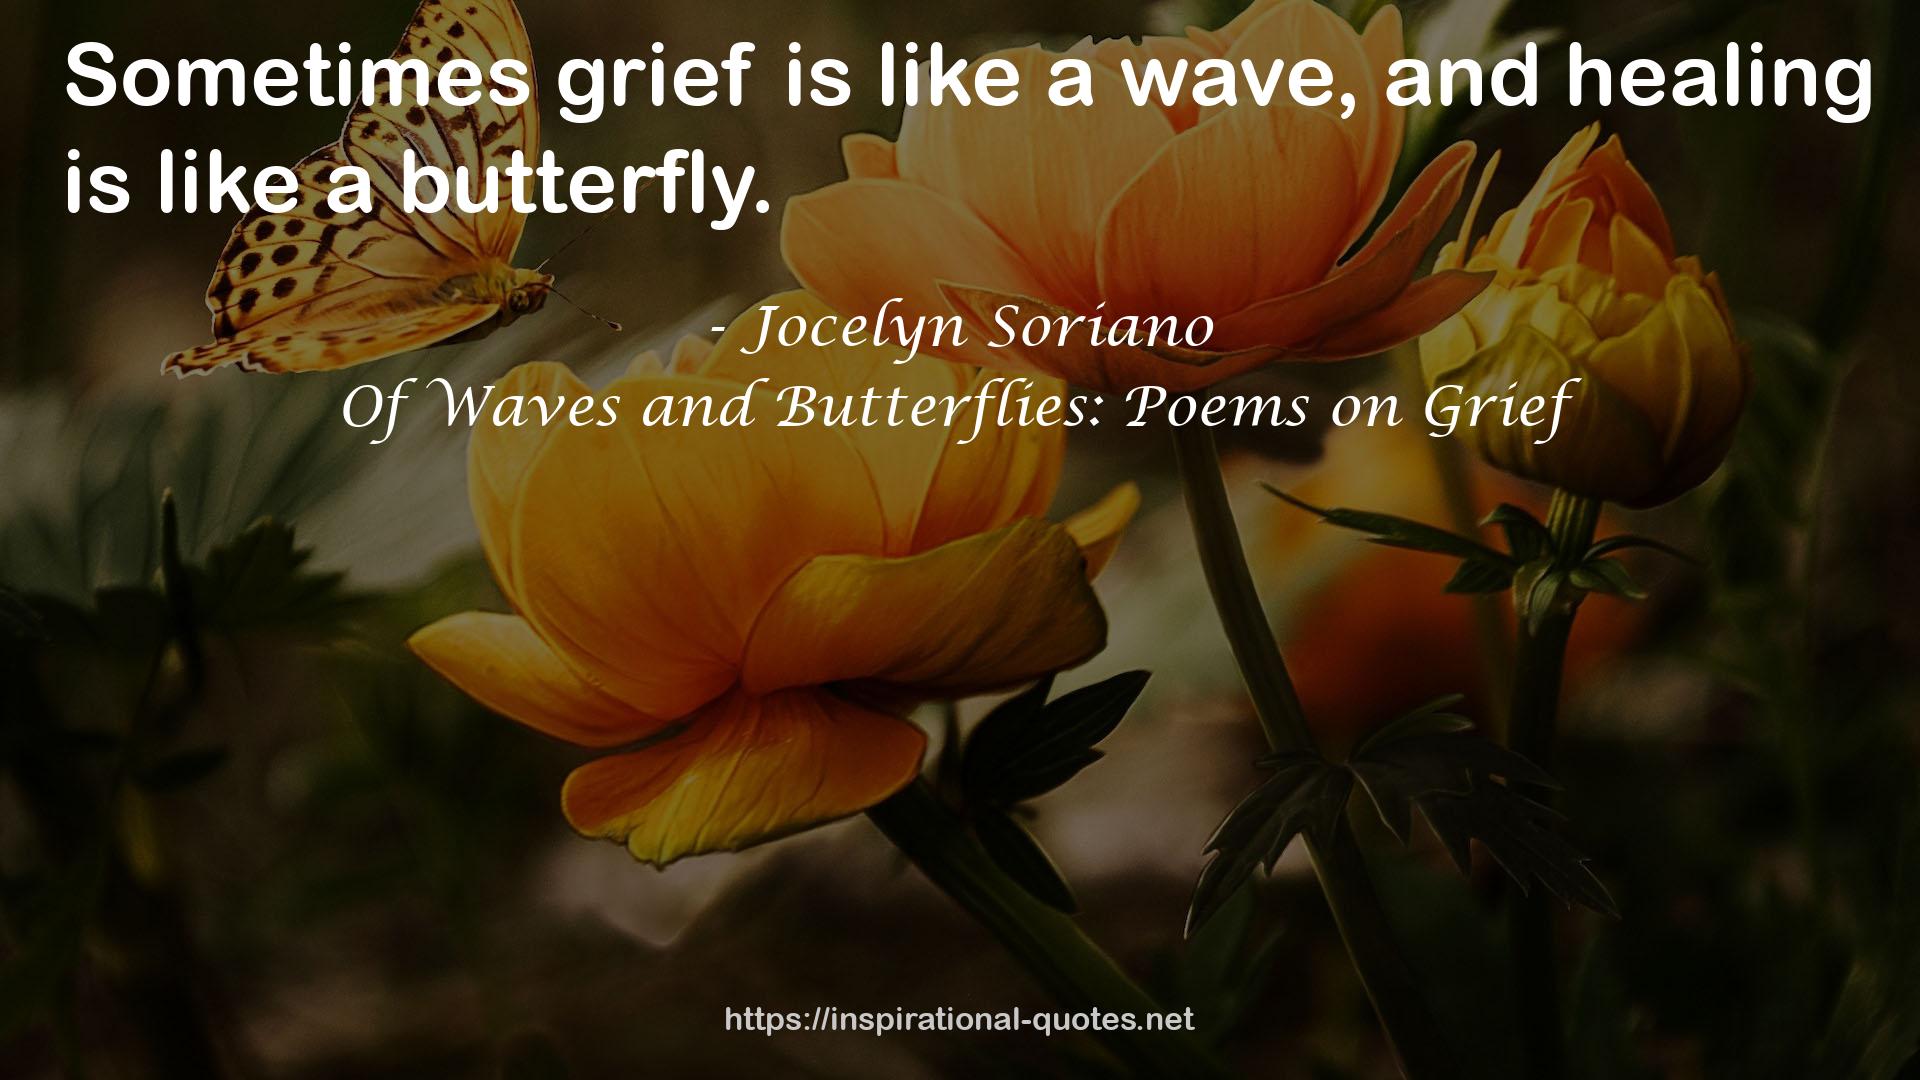 Of Waves and Butterflies: Poems on Grief QUOTES